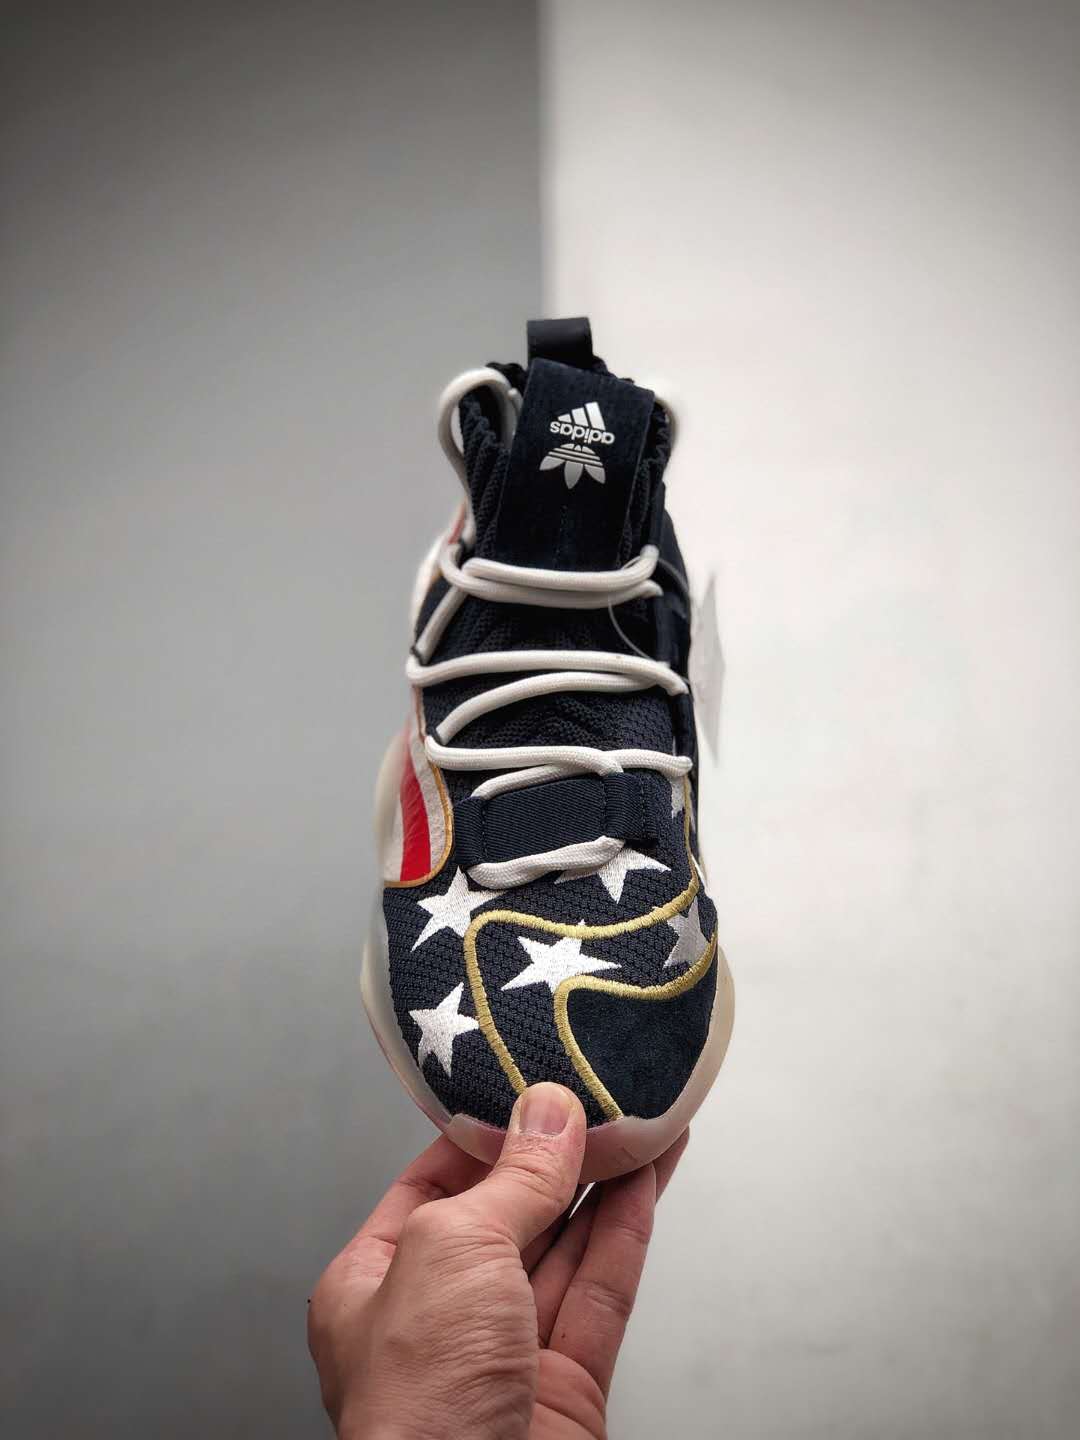 Adidas Crazy BYW X 'Veterans Day' EE9058 - Premium Sneakers for Style and Support